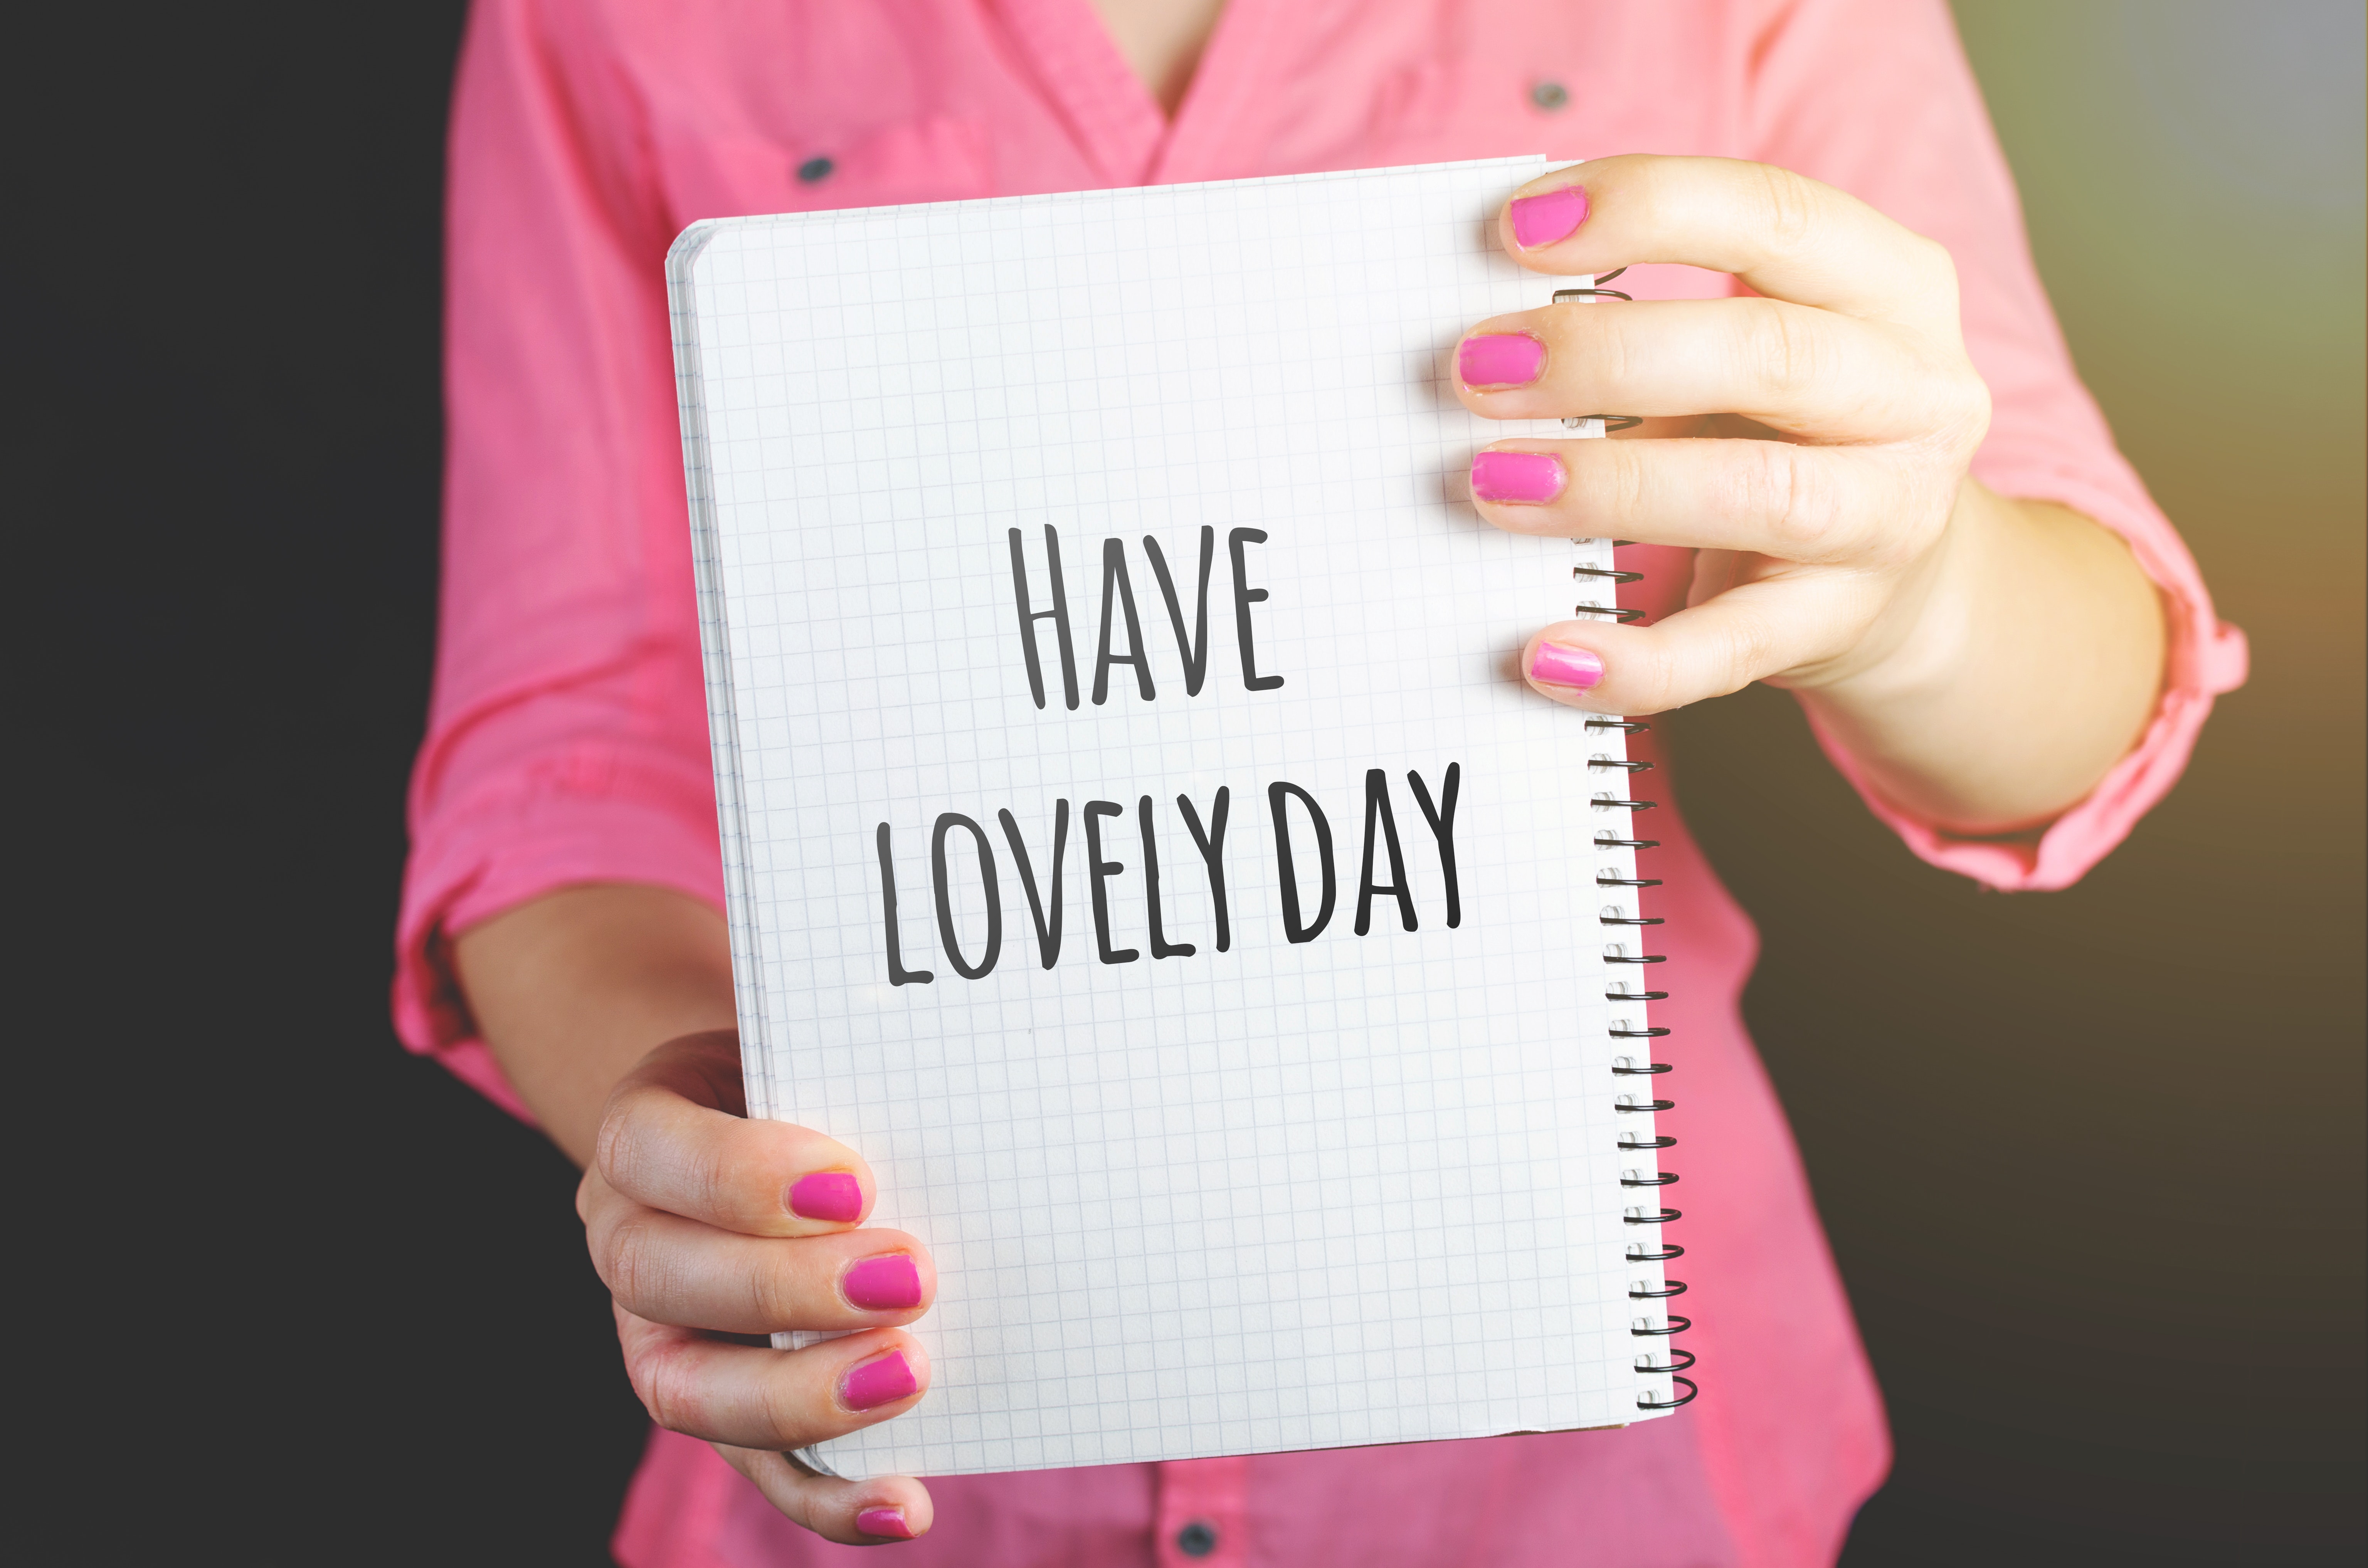 Woman Wearing Pink Dress Holding Graphing Notebook With Have a Lovely Day Sign, Ad, Notes, Woman, Text, HQ Photo